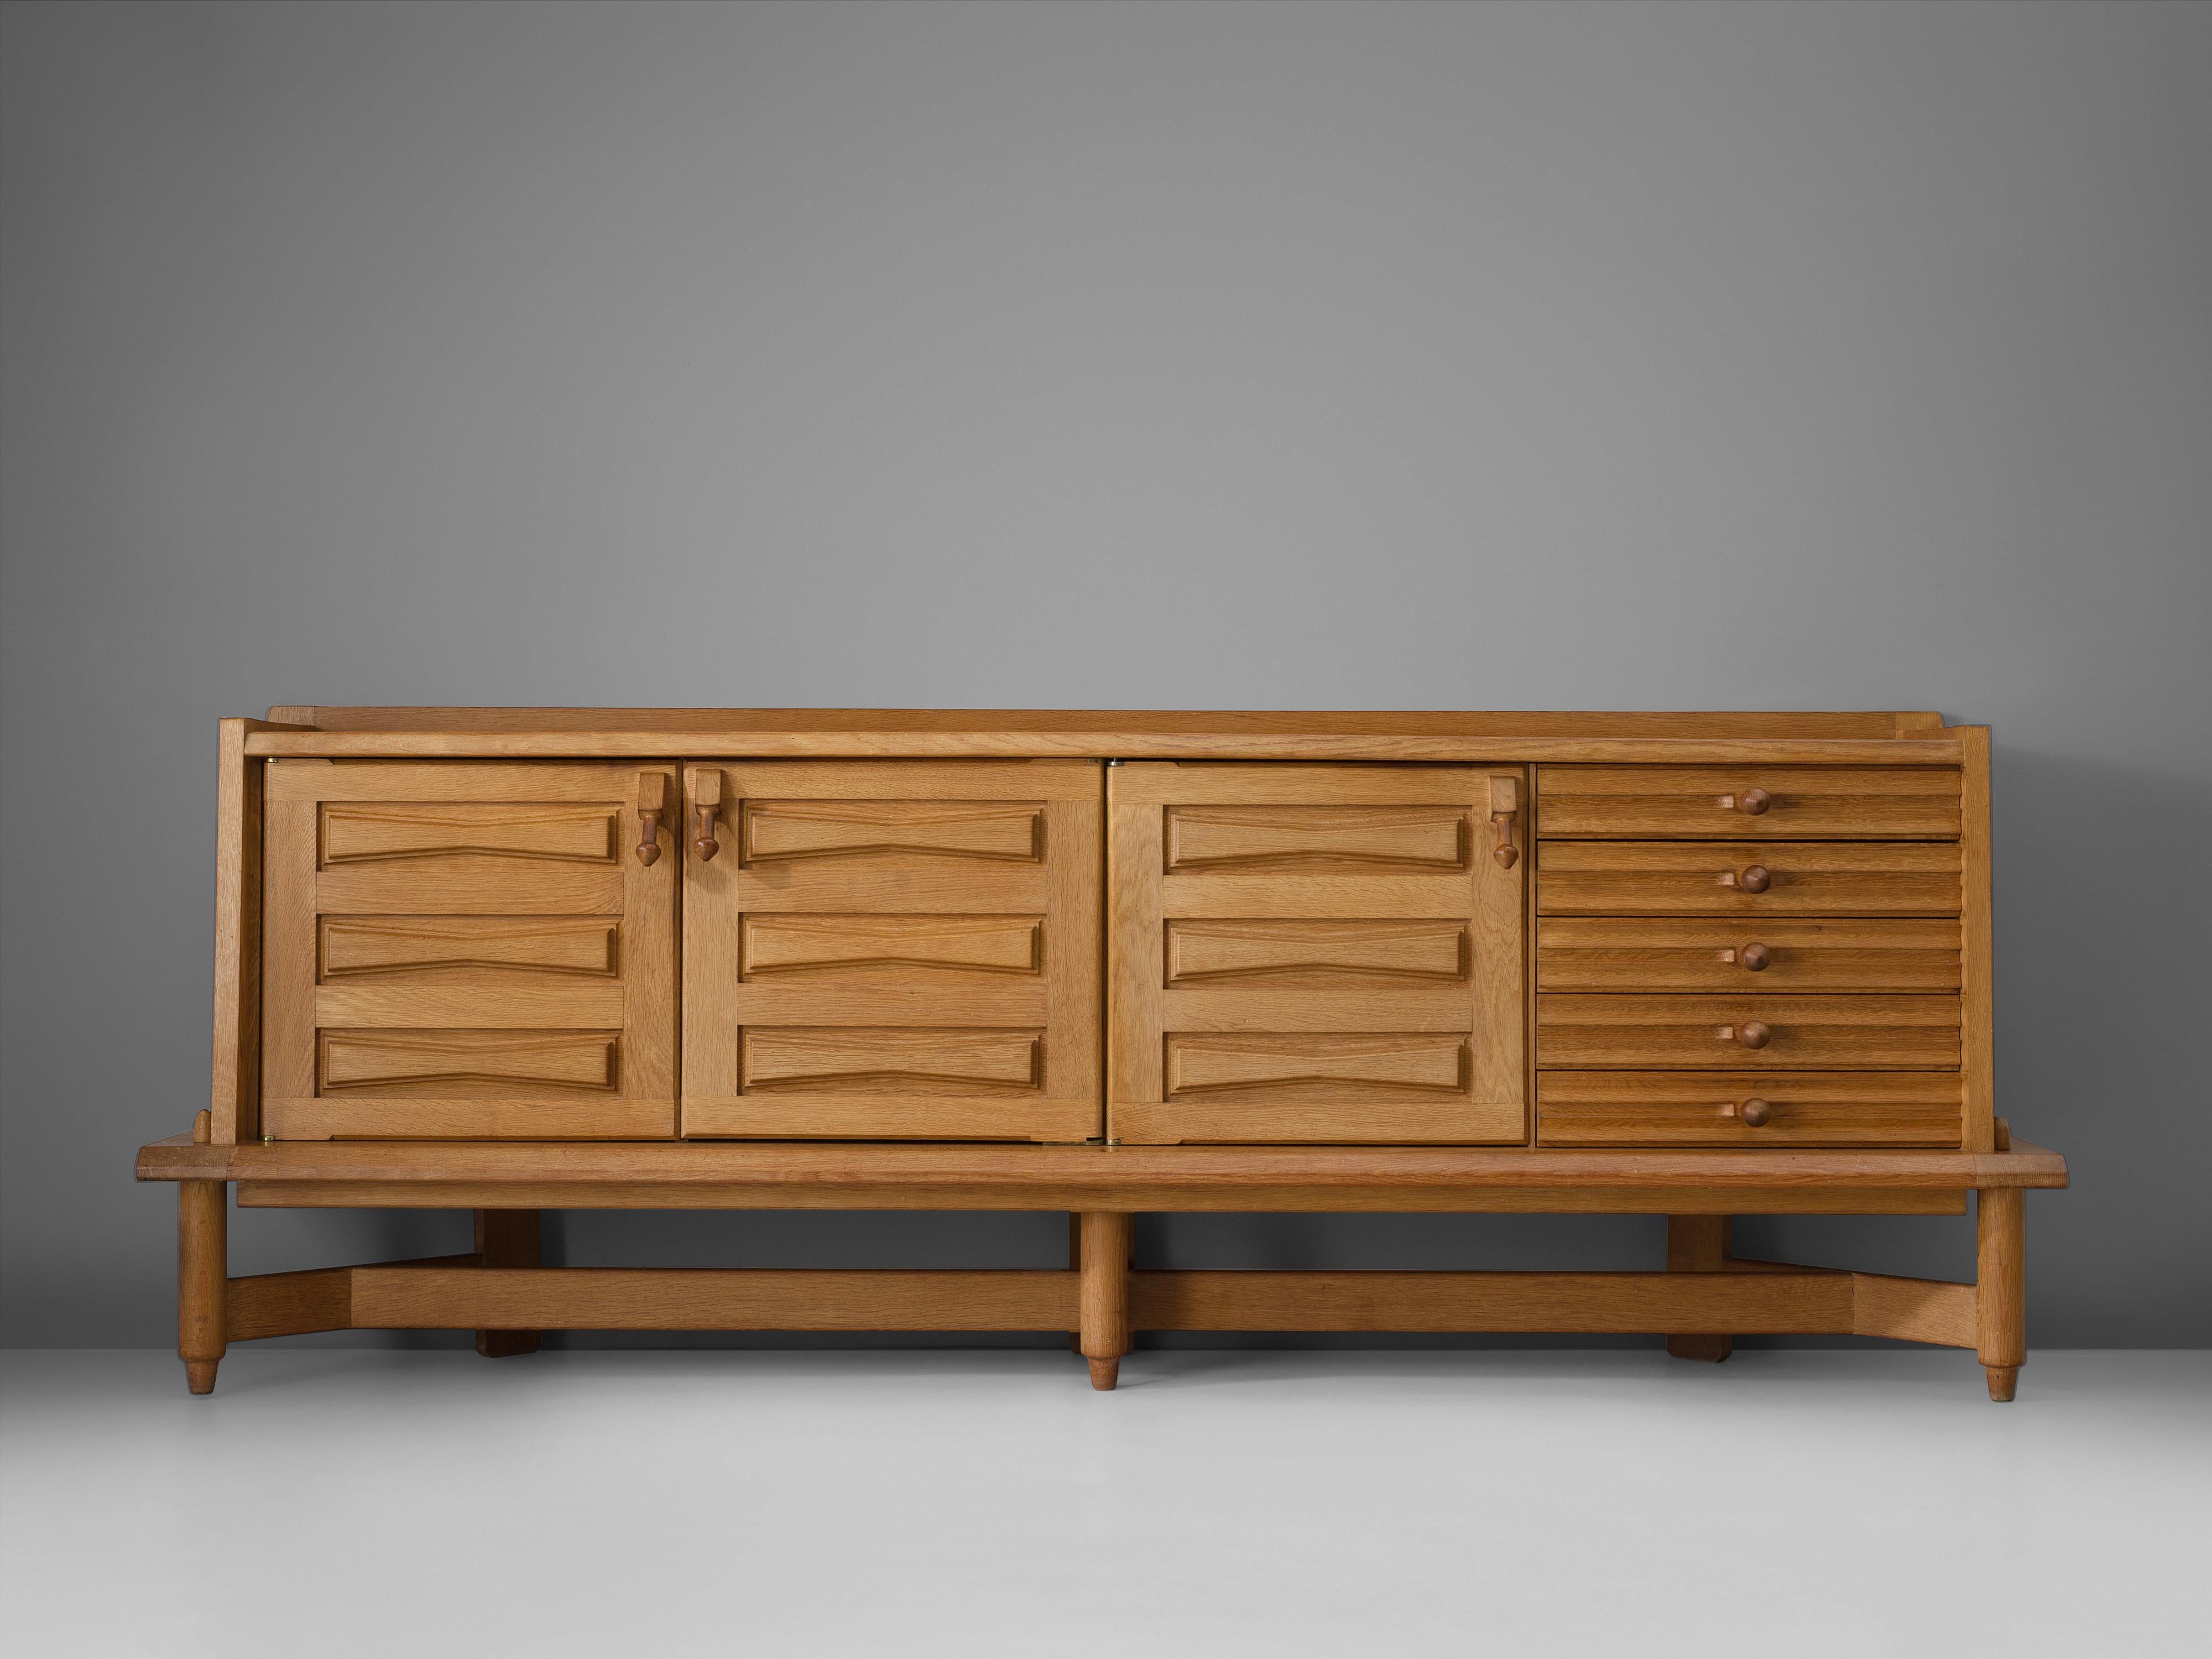 Guillerme et Chambron for Votre Maison, credenza 'Saint-Veran', oak, ceramic, France, 1960s.

Characteristic sideboard in solid oak. This cabinet holds the characteristics of the French designer duo Jacques Chambron and Robert Guillerme. As many